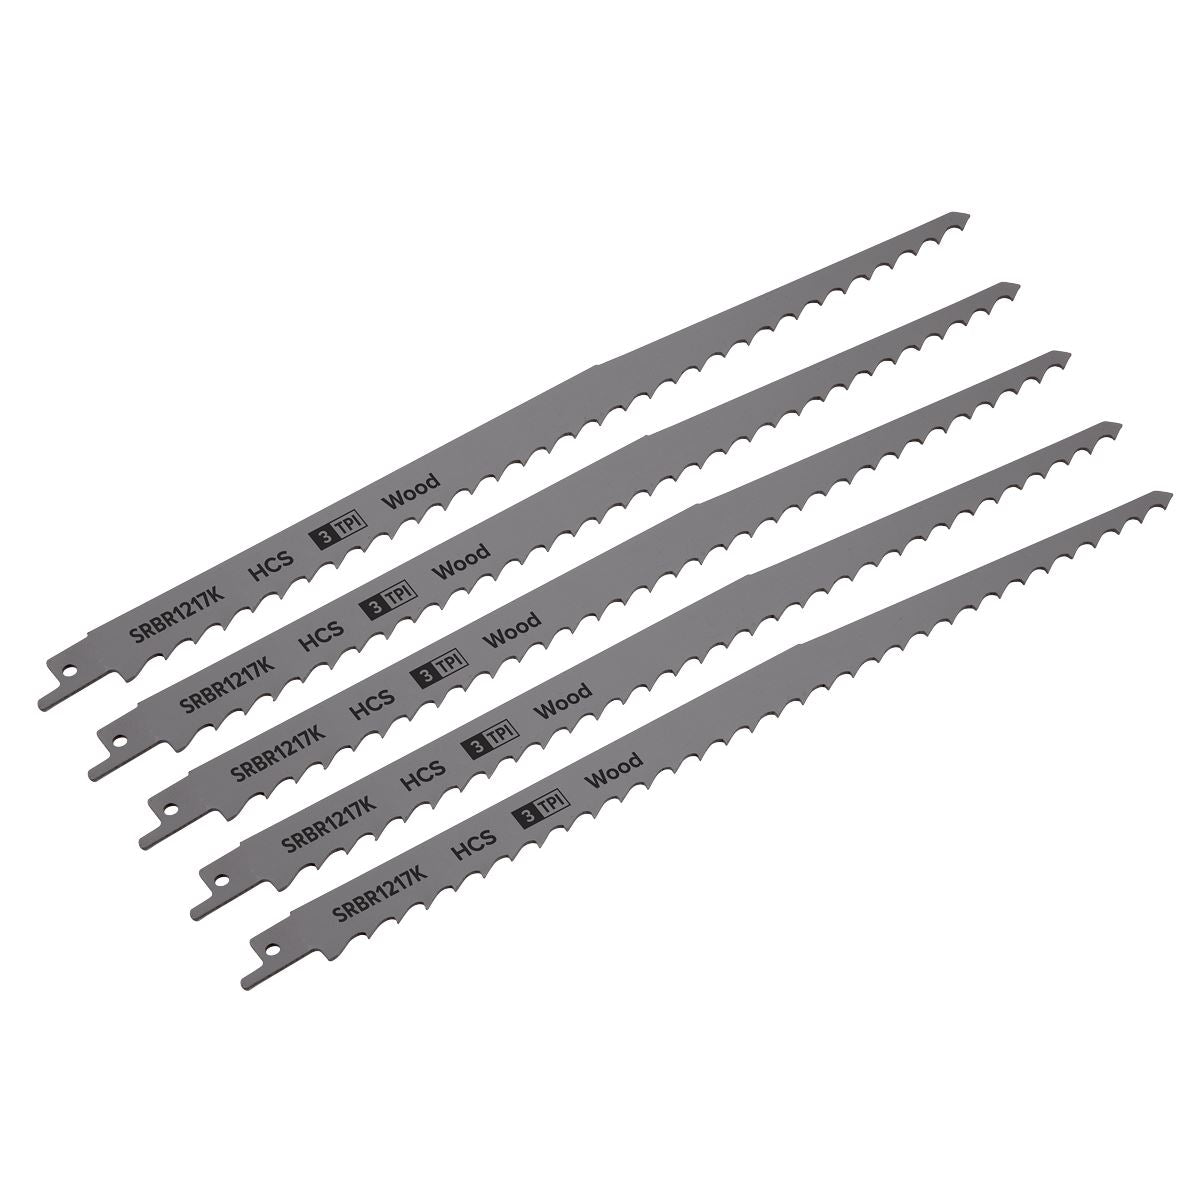 Sealey Reciprocating Saw Blade Pruning & Coarse Wood 300mm 3tpi - Pack of 5